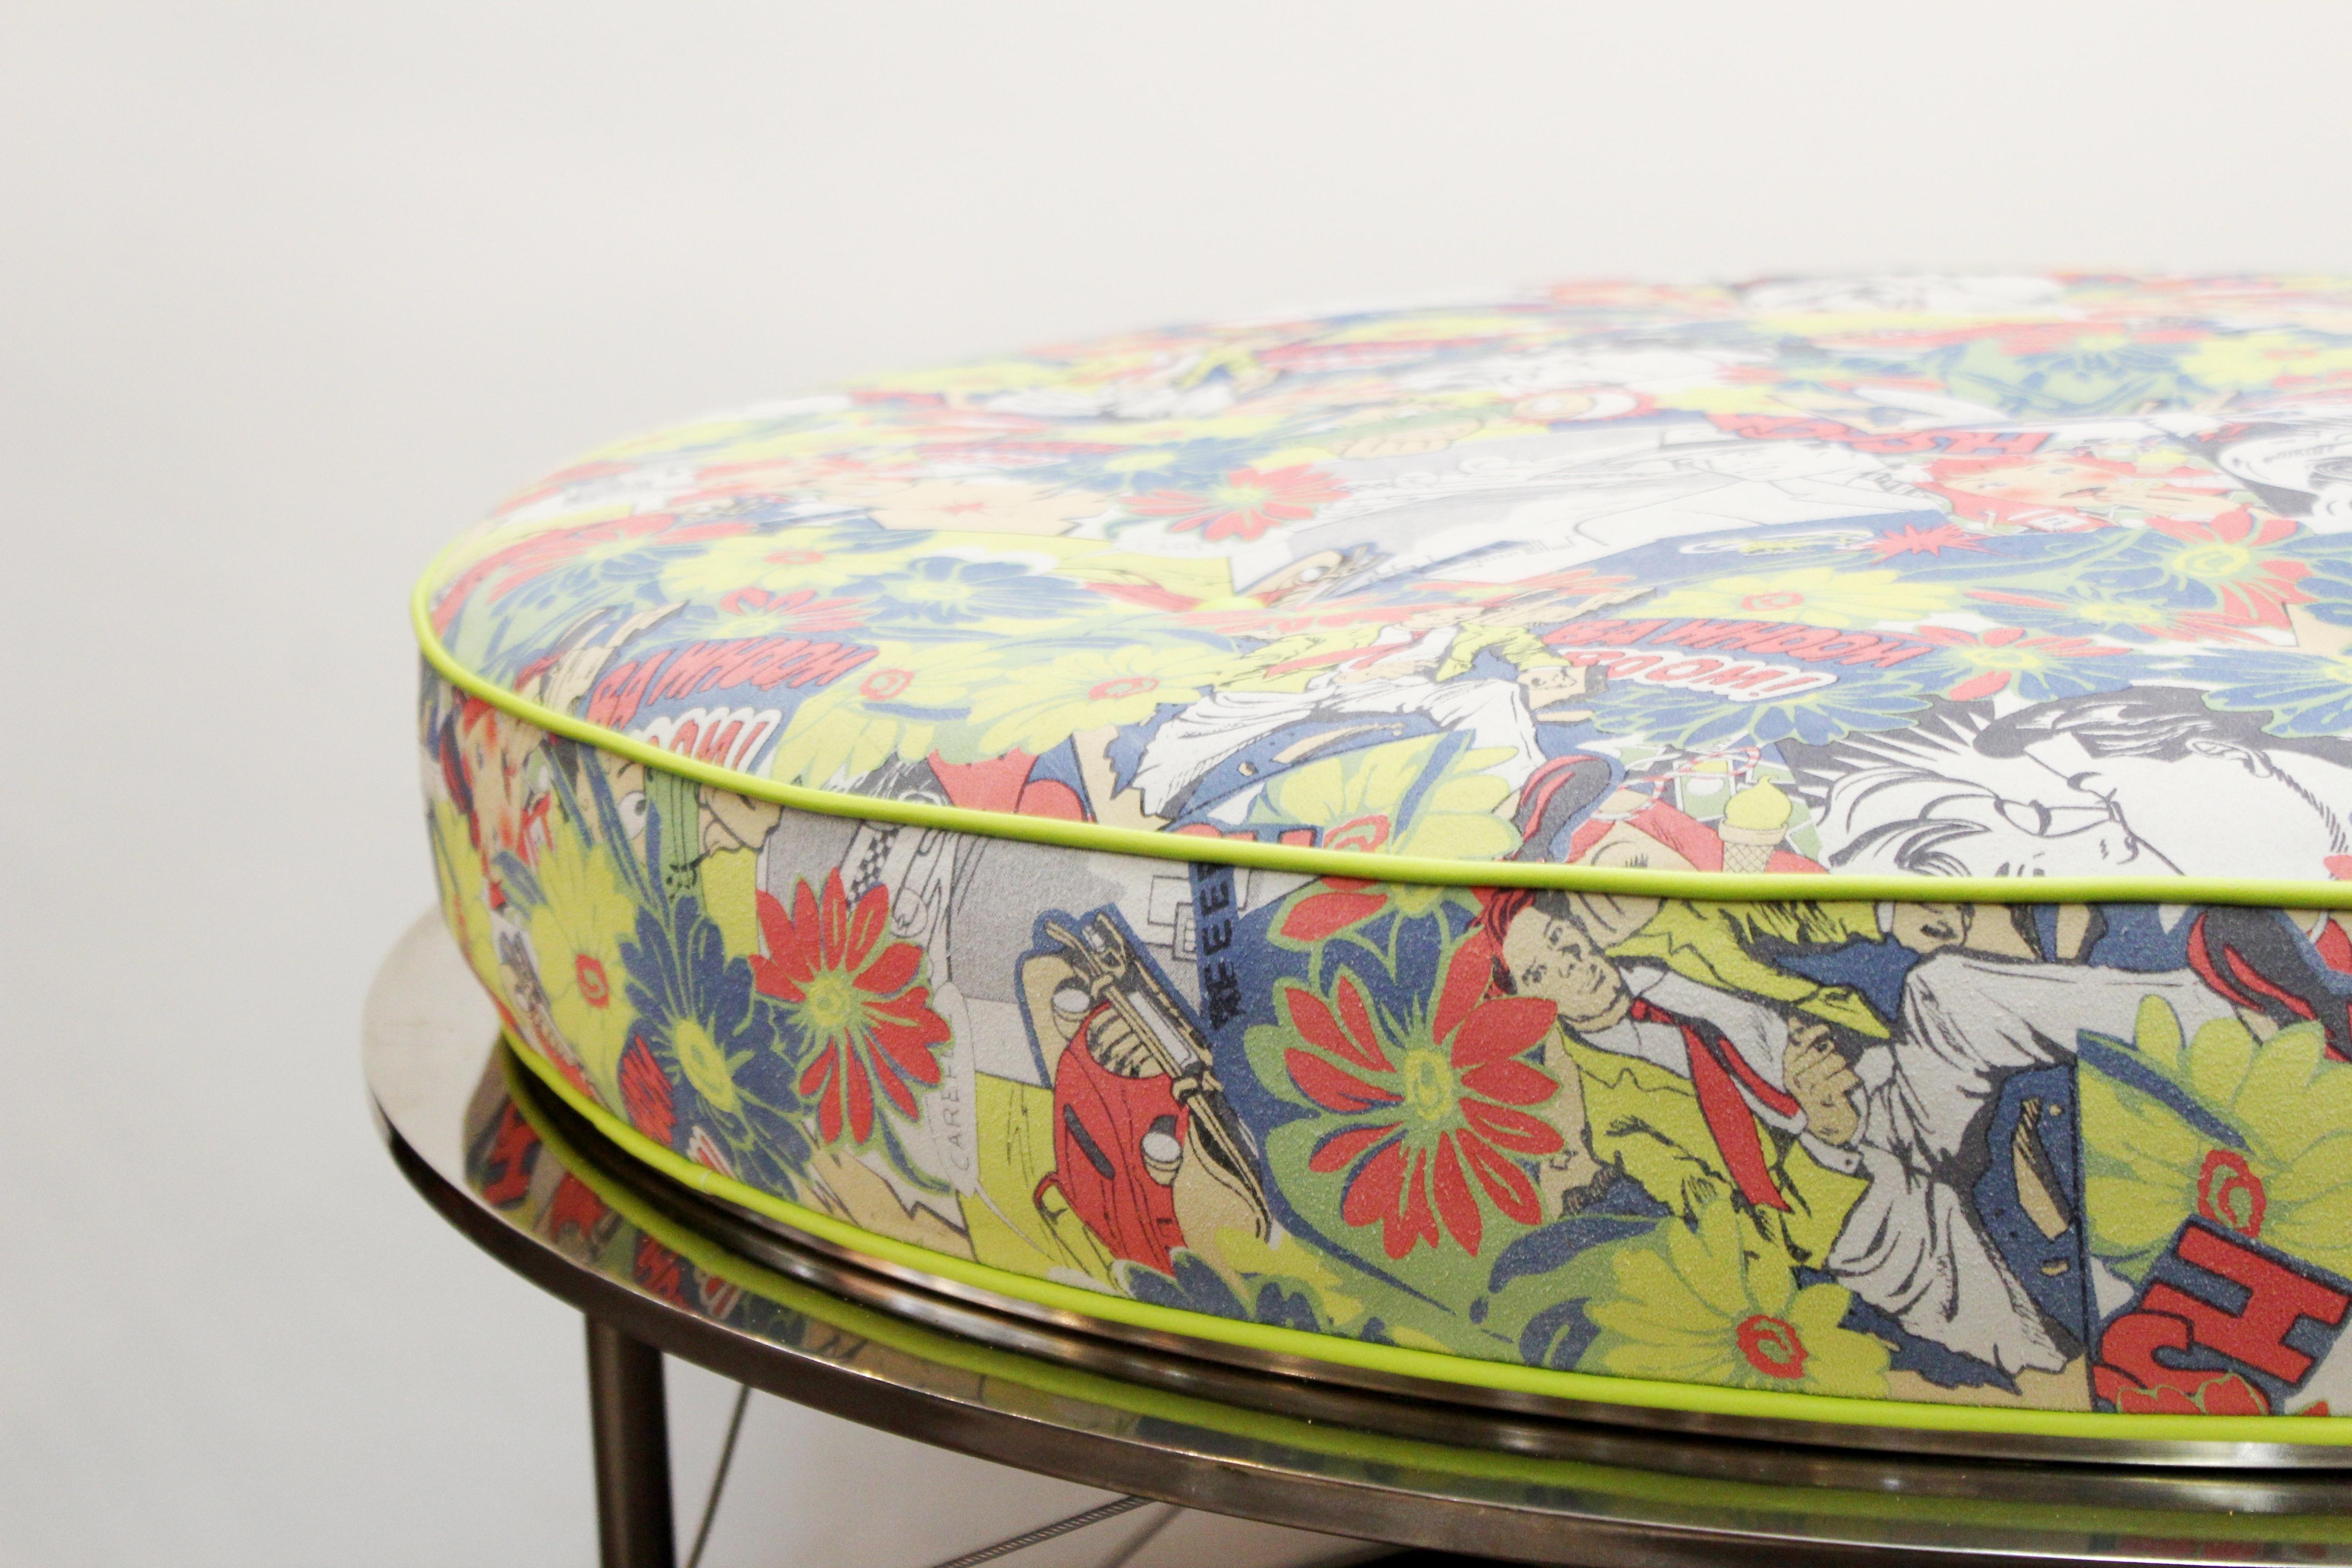 Modern Midcentury Ottoman with Chrome Frame and Pop-Art Style Upholstery